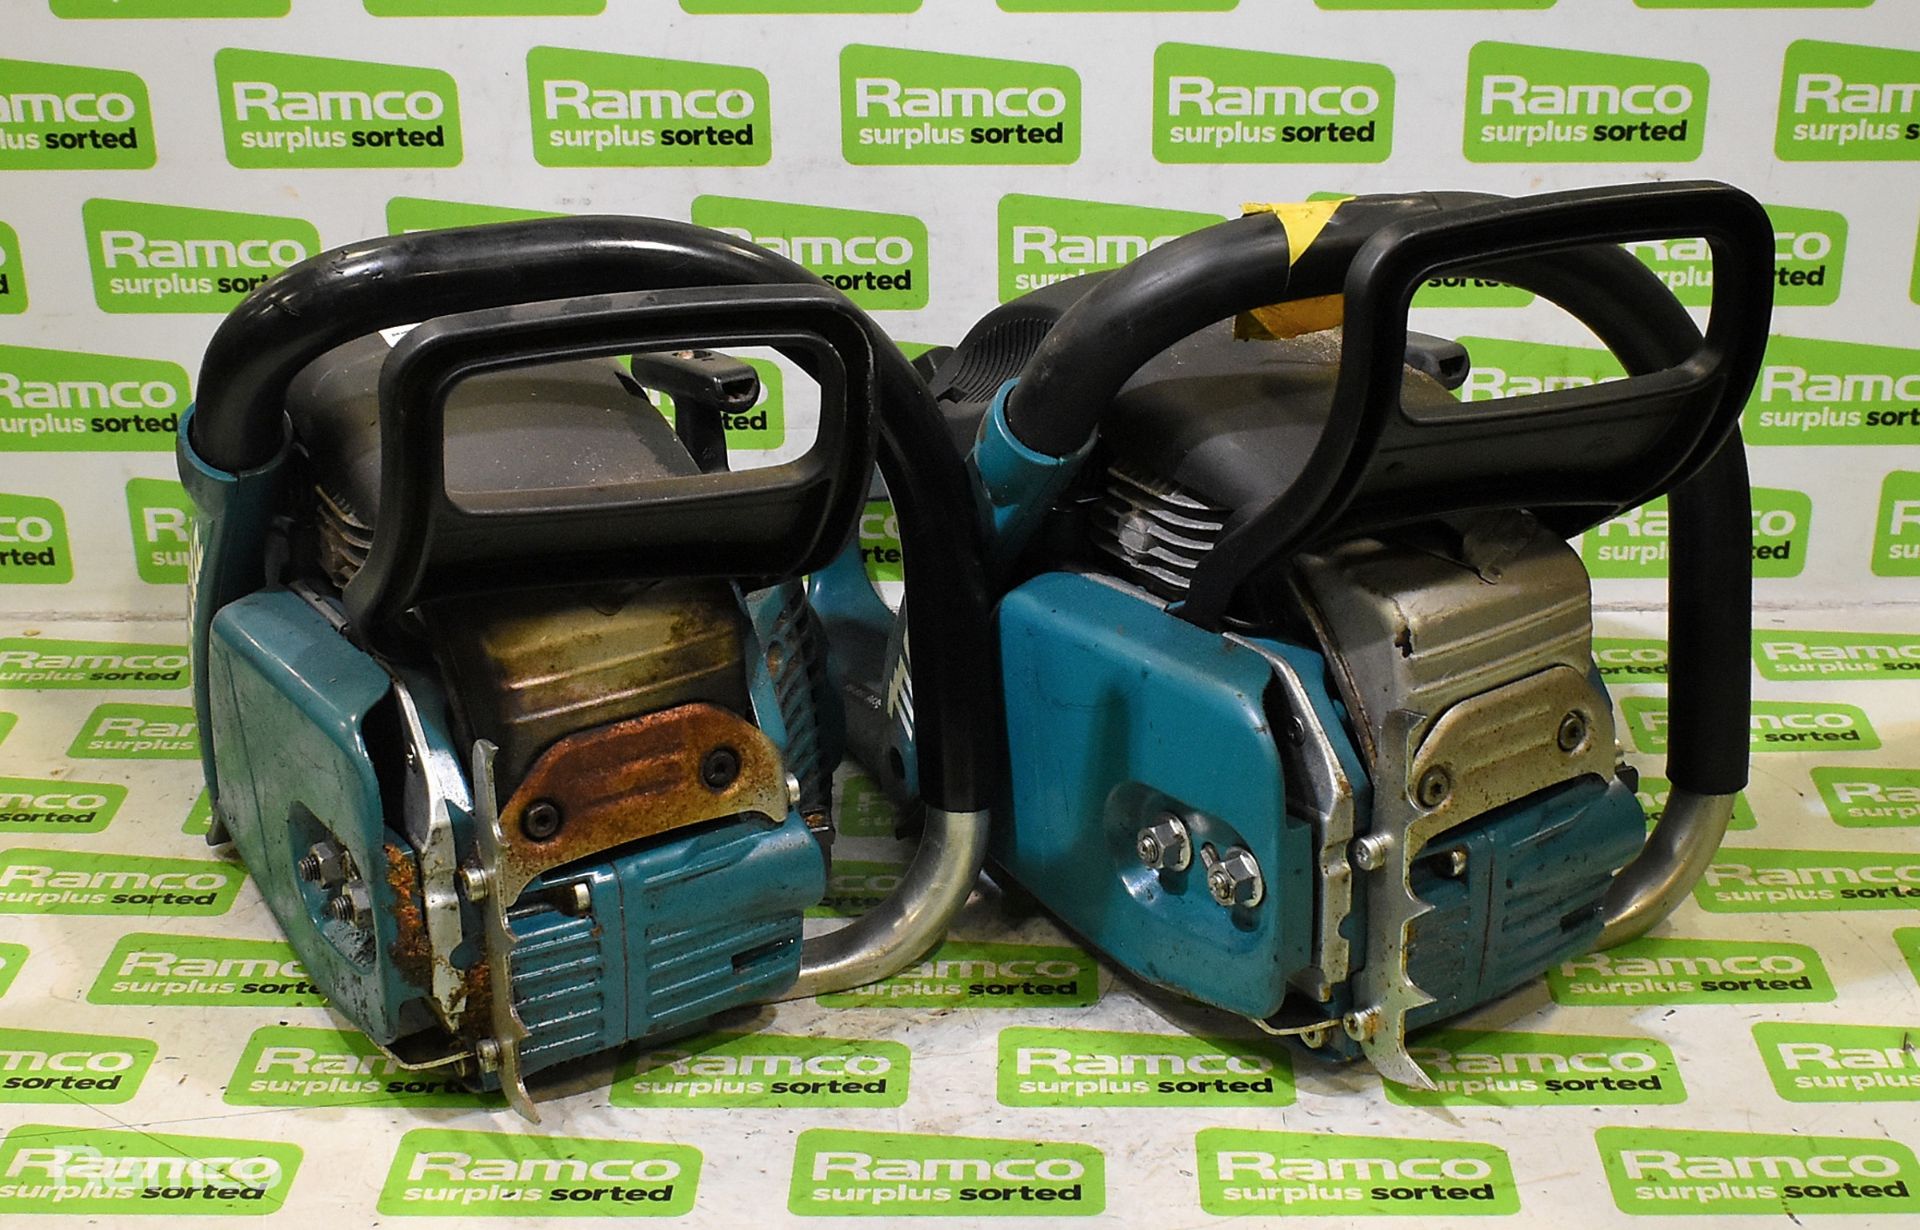 2x Makita DCS5030 50cc petrol chainsaw - BODIES ONLY - AS SPARES AND REPAIRS